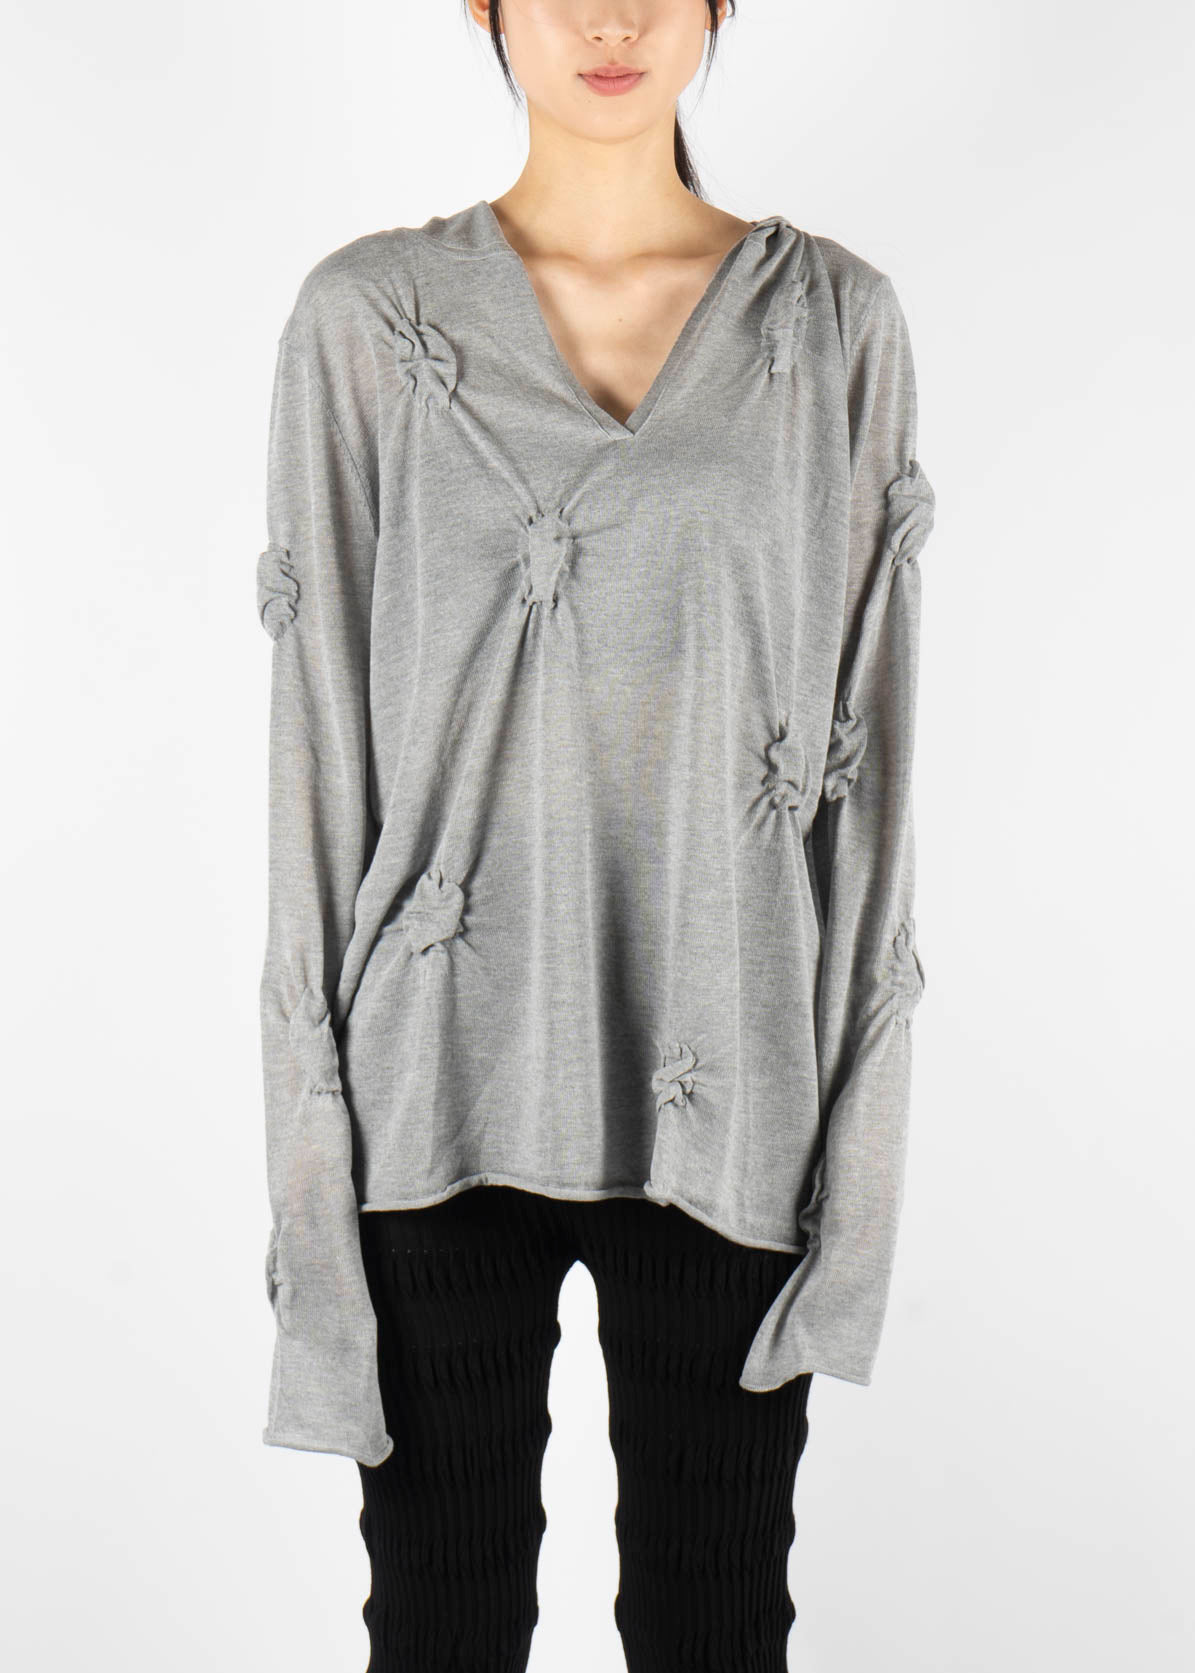 Bubble Hooded Top Grey